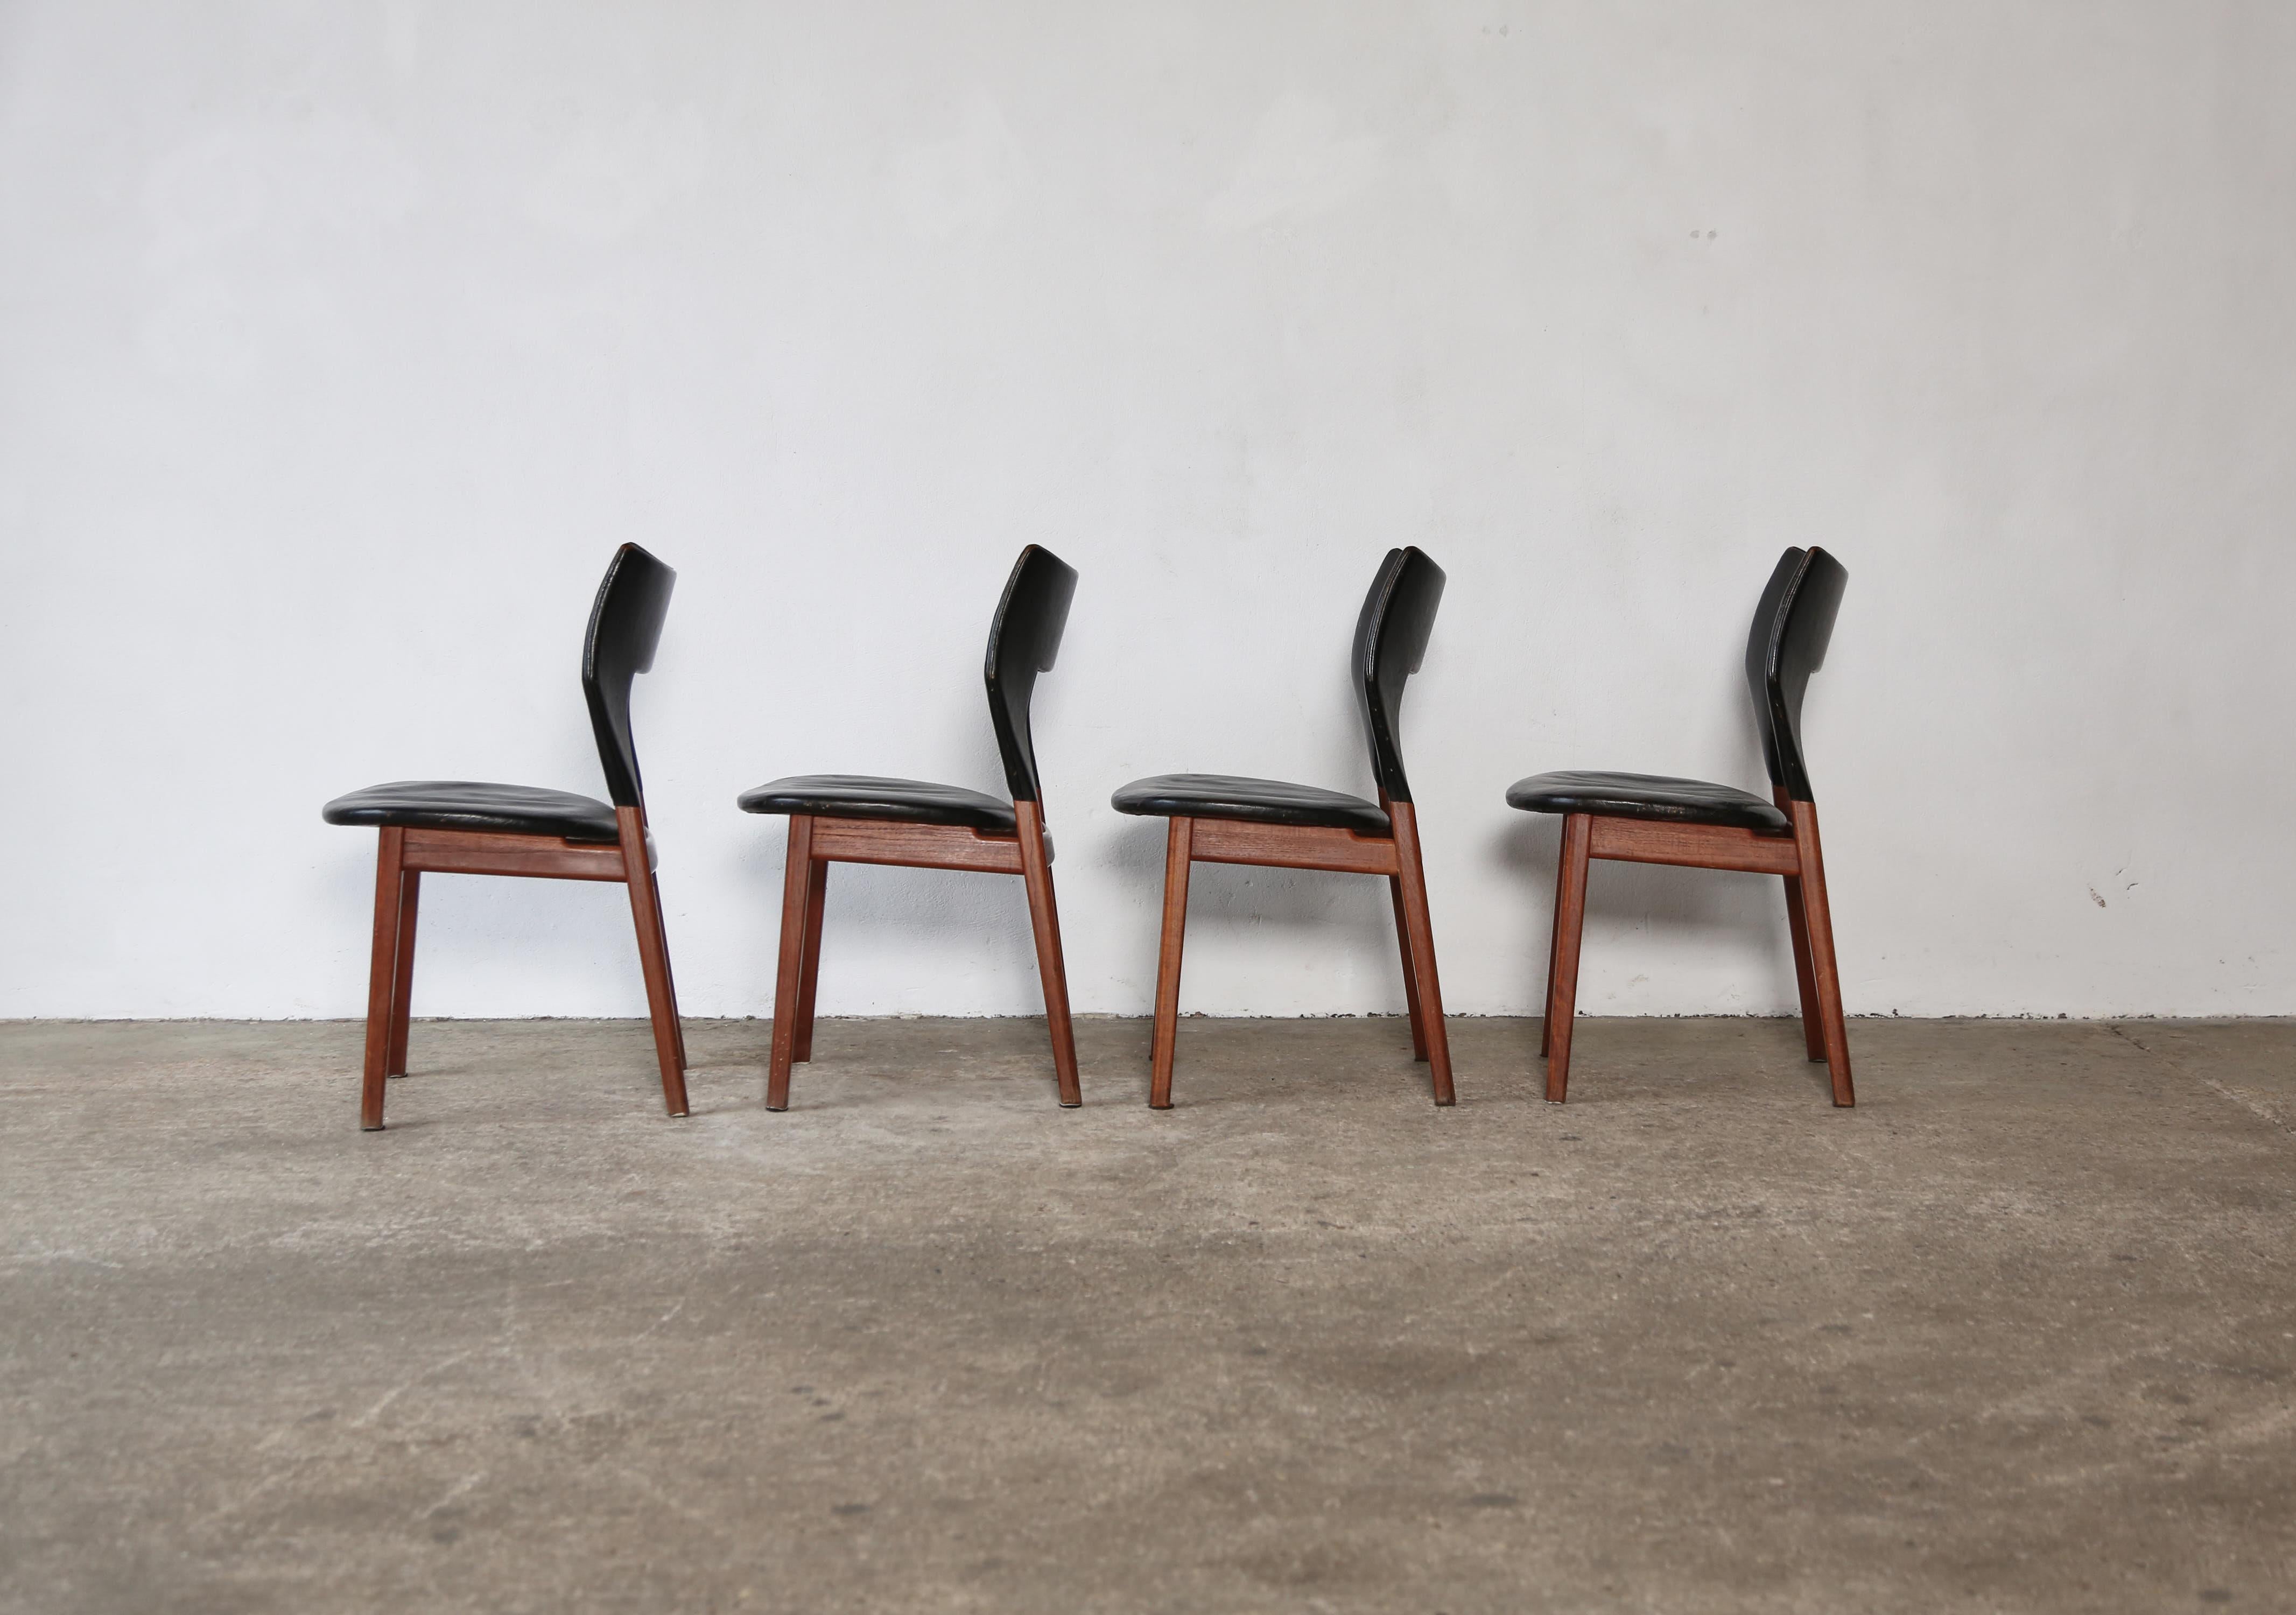 Edvard and Tove Kindt-Larsen Dining Chairs, Thorald Madsens, Denmark, 1950s For Sale 7